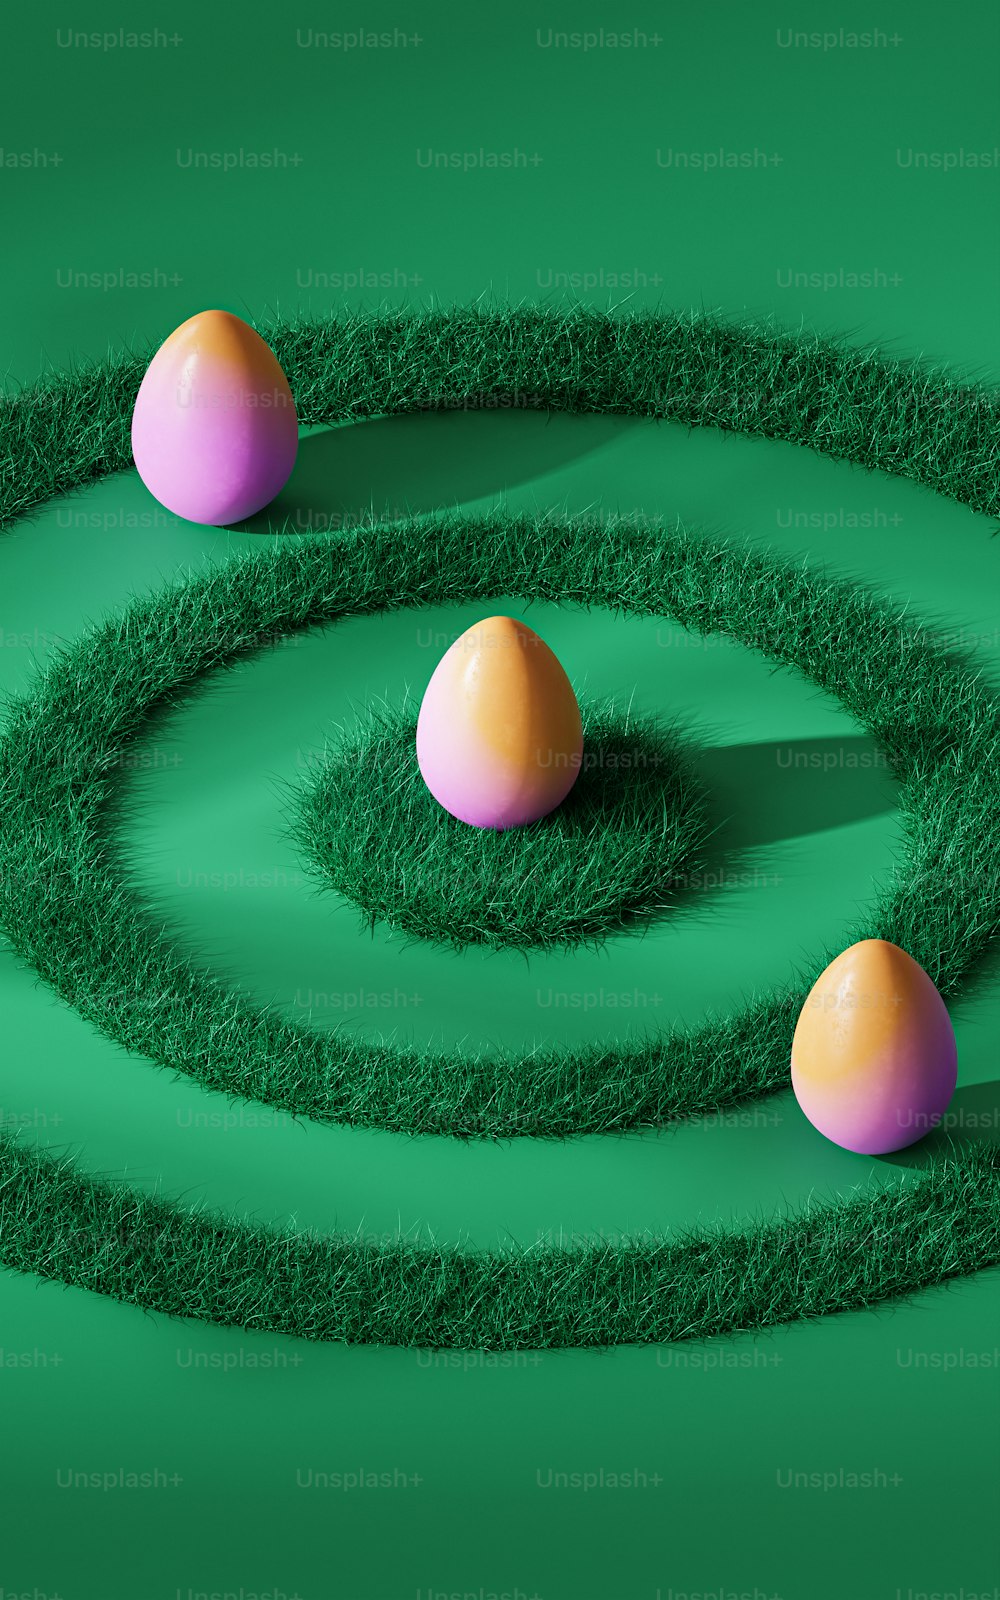 three eggs are in a spiral on a green surface